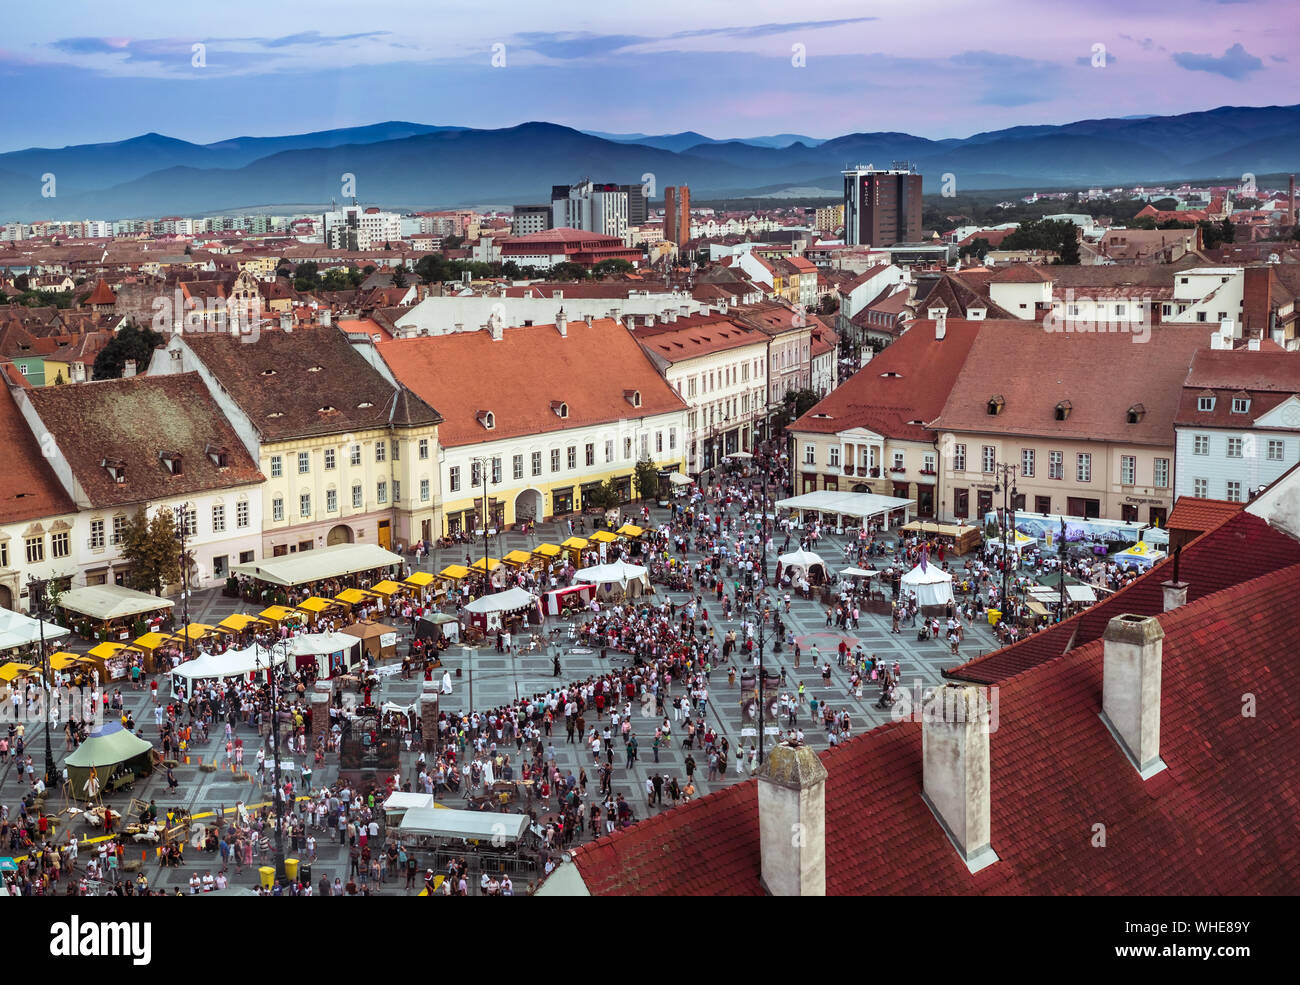 Sibiu City, Romania - 25 August 2019. Aerial view over the Big Square from Sibiu, Romania, during the Medieval Festival 2019 Stock Photo